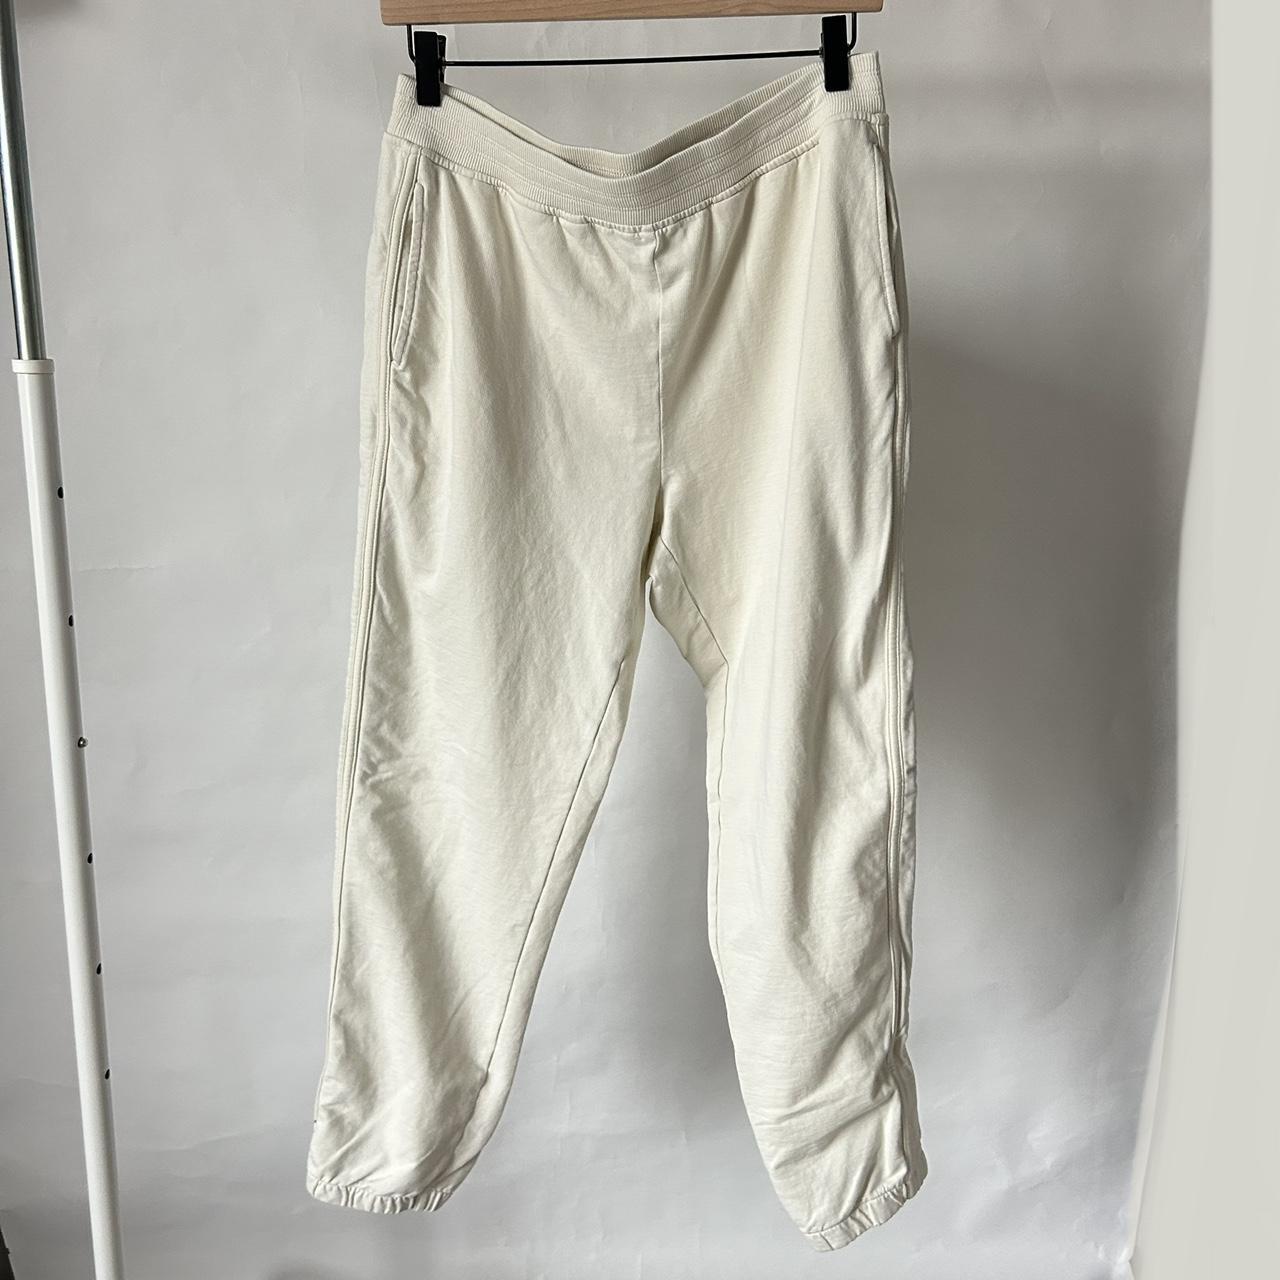 Aerie Women's Cream and White Joggers-tracksuits (3)